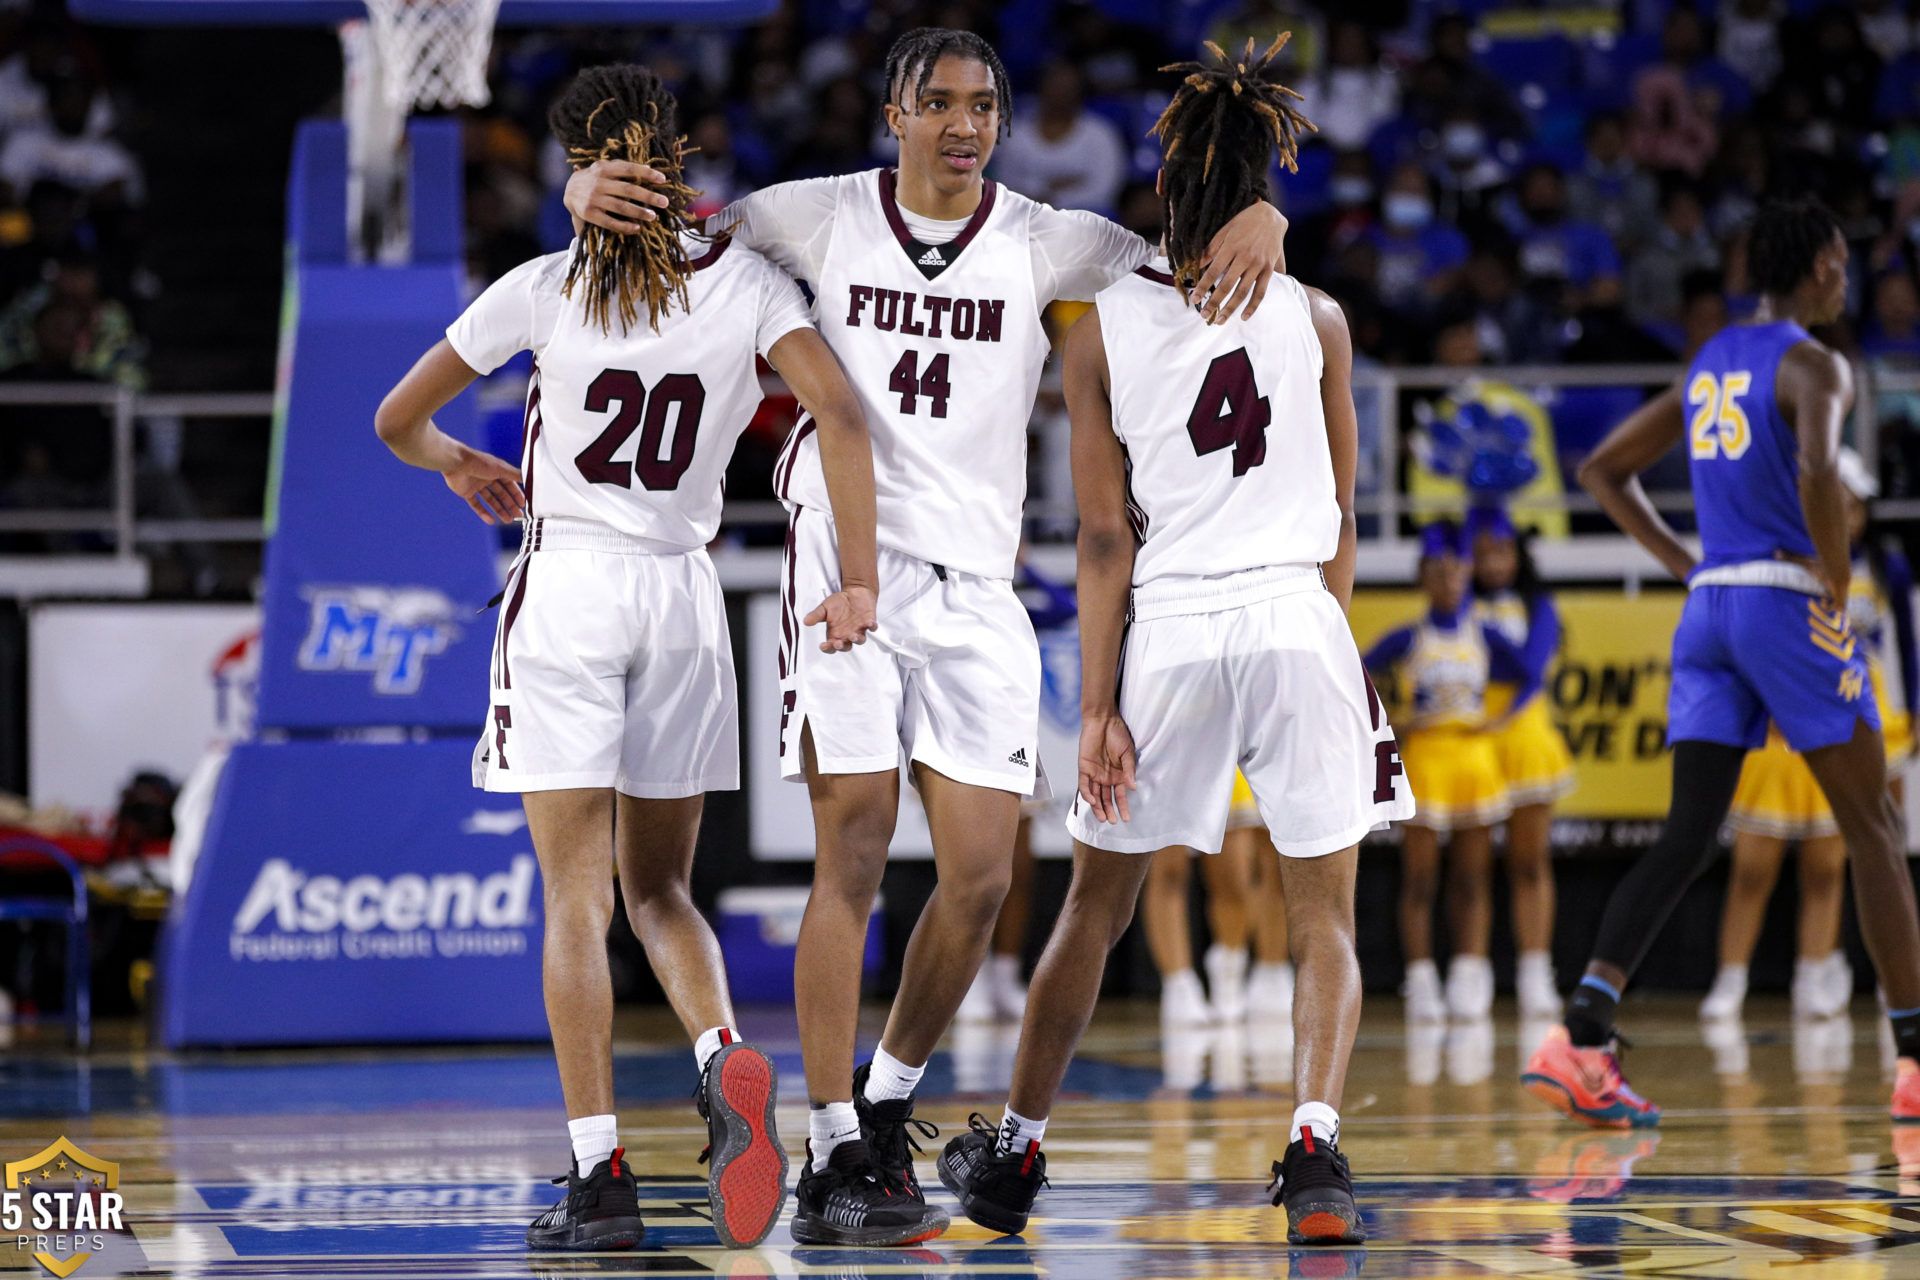 Fulton basketball's big 3 is more than just best in Knoxville